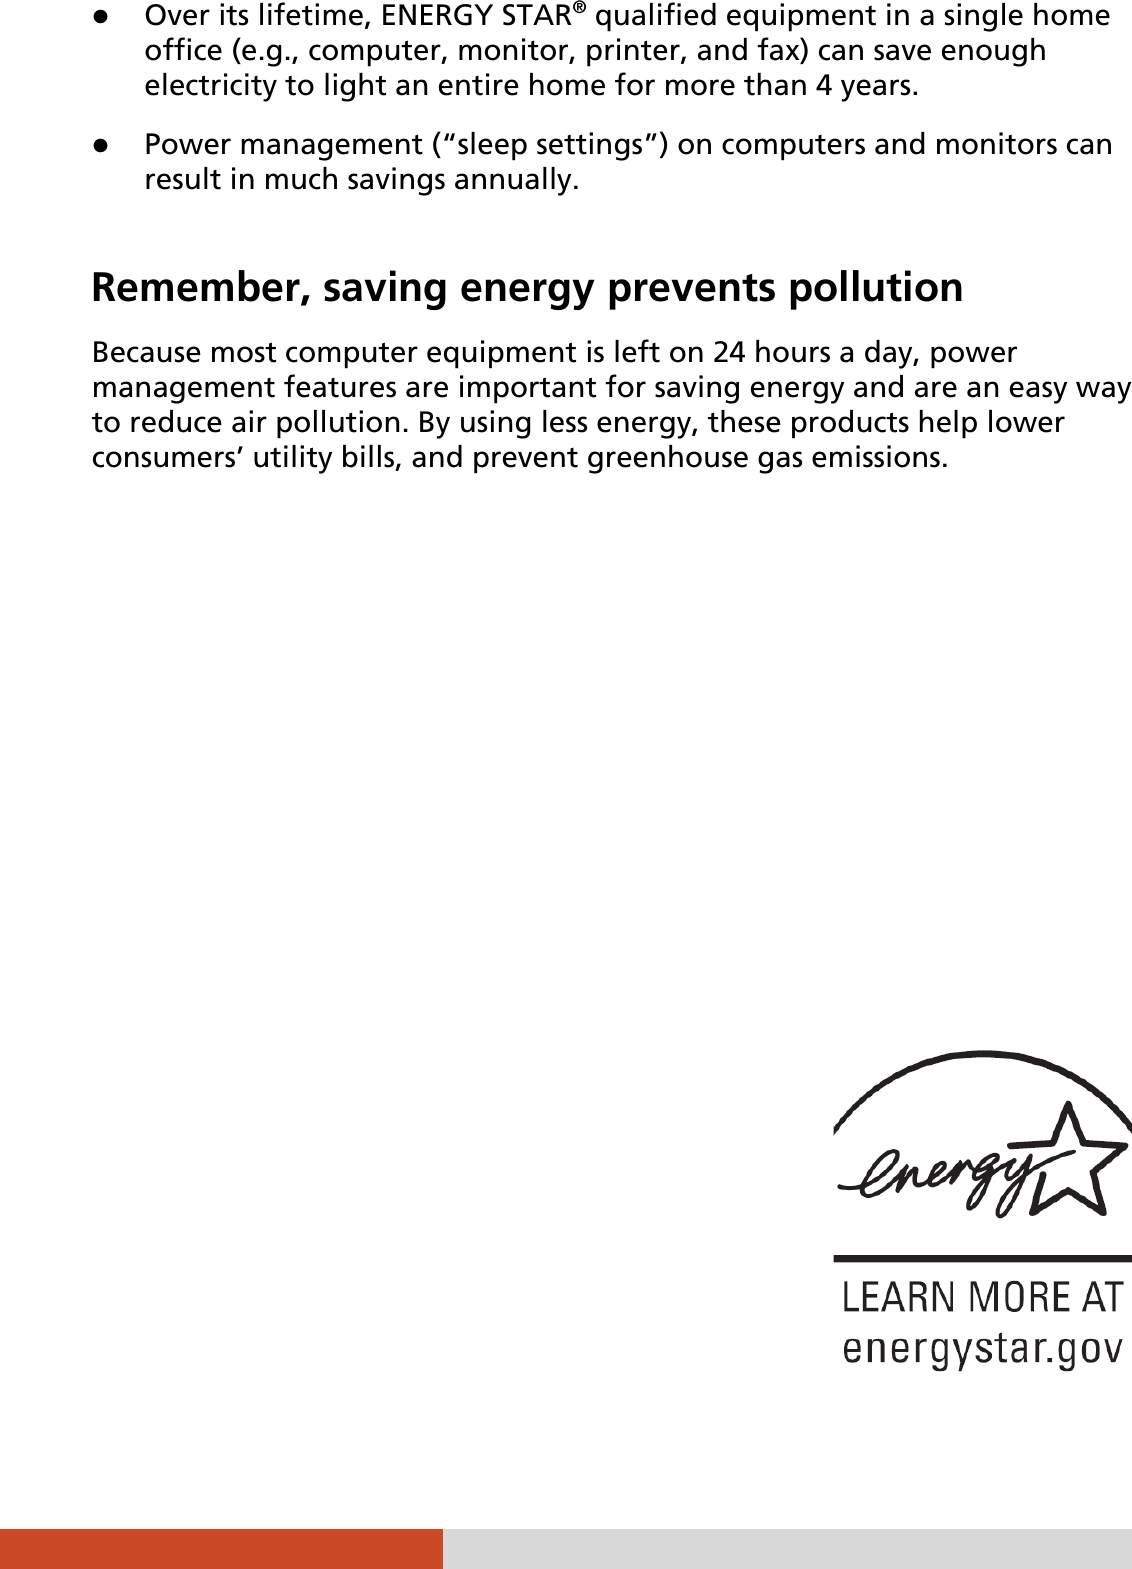   z Over its lifetime, ENERGY STAR® qualified equipment in a single home office (e.g., computer, monitor, printer, and fax) can save enough electricity to light an entire home for more than 4 years. z Power management (“sleep settings”) on computers and monitors can result in much savings annually.  Remember, saving energy prevents pollution Because most computer equipment is left on 24 hours a day, power management features are important for saving energy and are an easy way to reduce air pollution. By using less energy, these products help lower consumers’ utility bills, and prevent greenhouse gas emissions.    